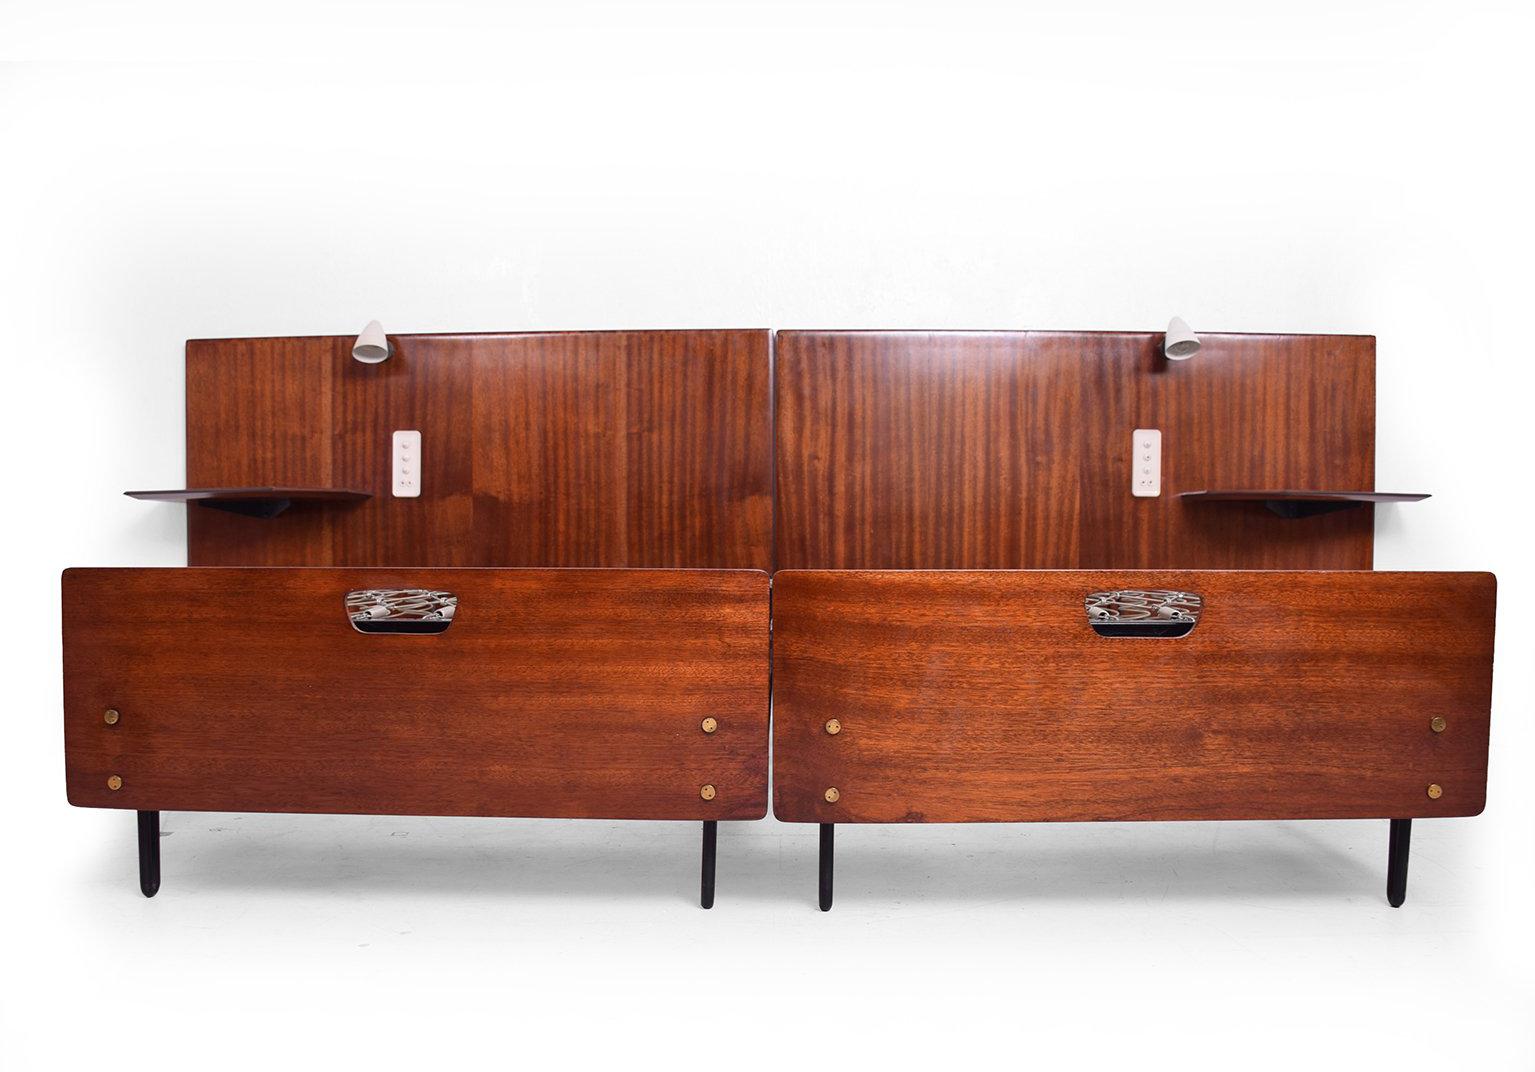 For your consideration a Mid-Century Modern bed made in Italy. Acquired from apartment in Milan, I was told the design of apartment was made by Osvaldo Borsani, however there is no documentation available. 

The headboard splits into two sections